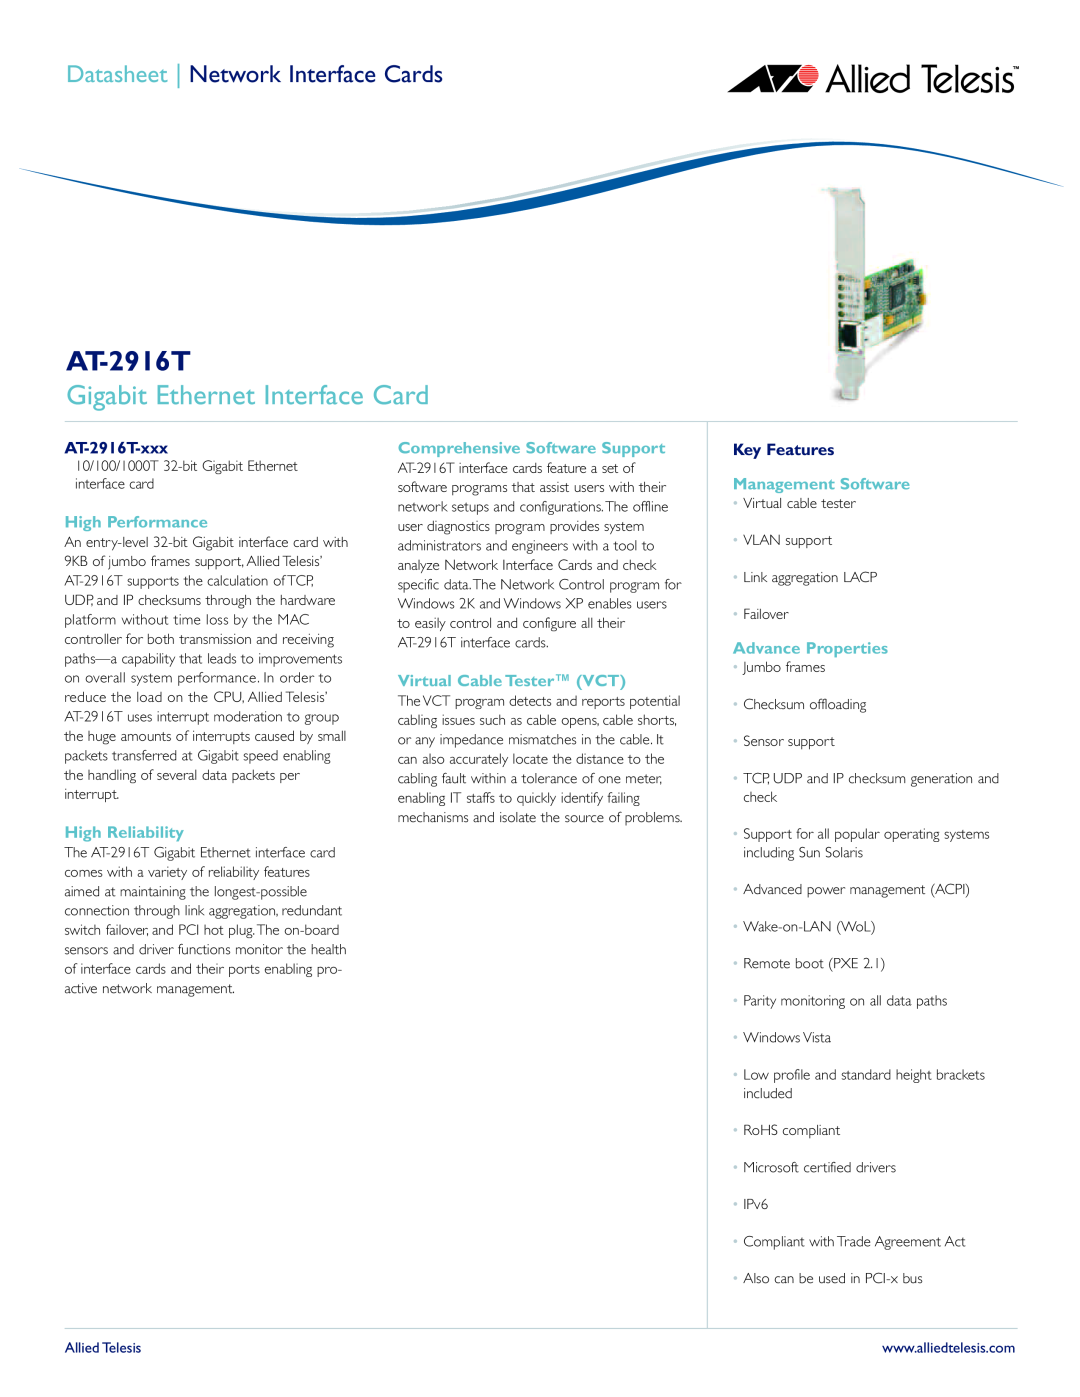 Allied Telesis manual Gigabit Ethernet Interface Card, AT-2916T-xxx, Key Features, Datasheet Network Interface Cards 